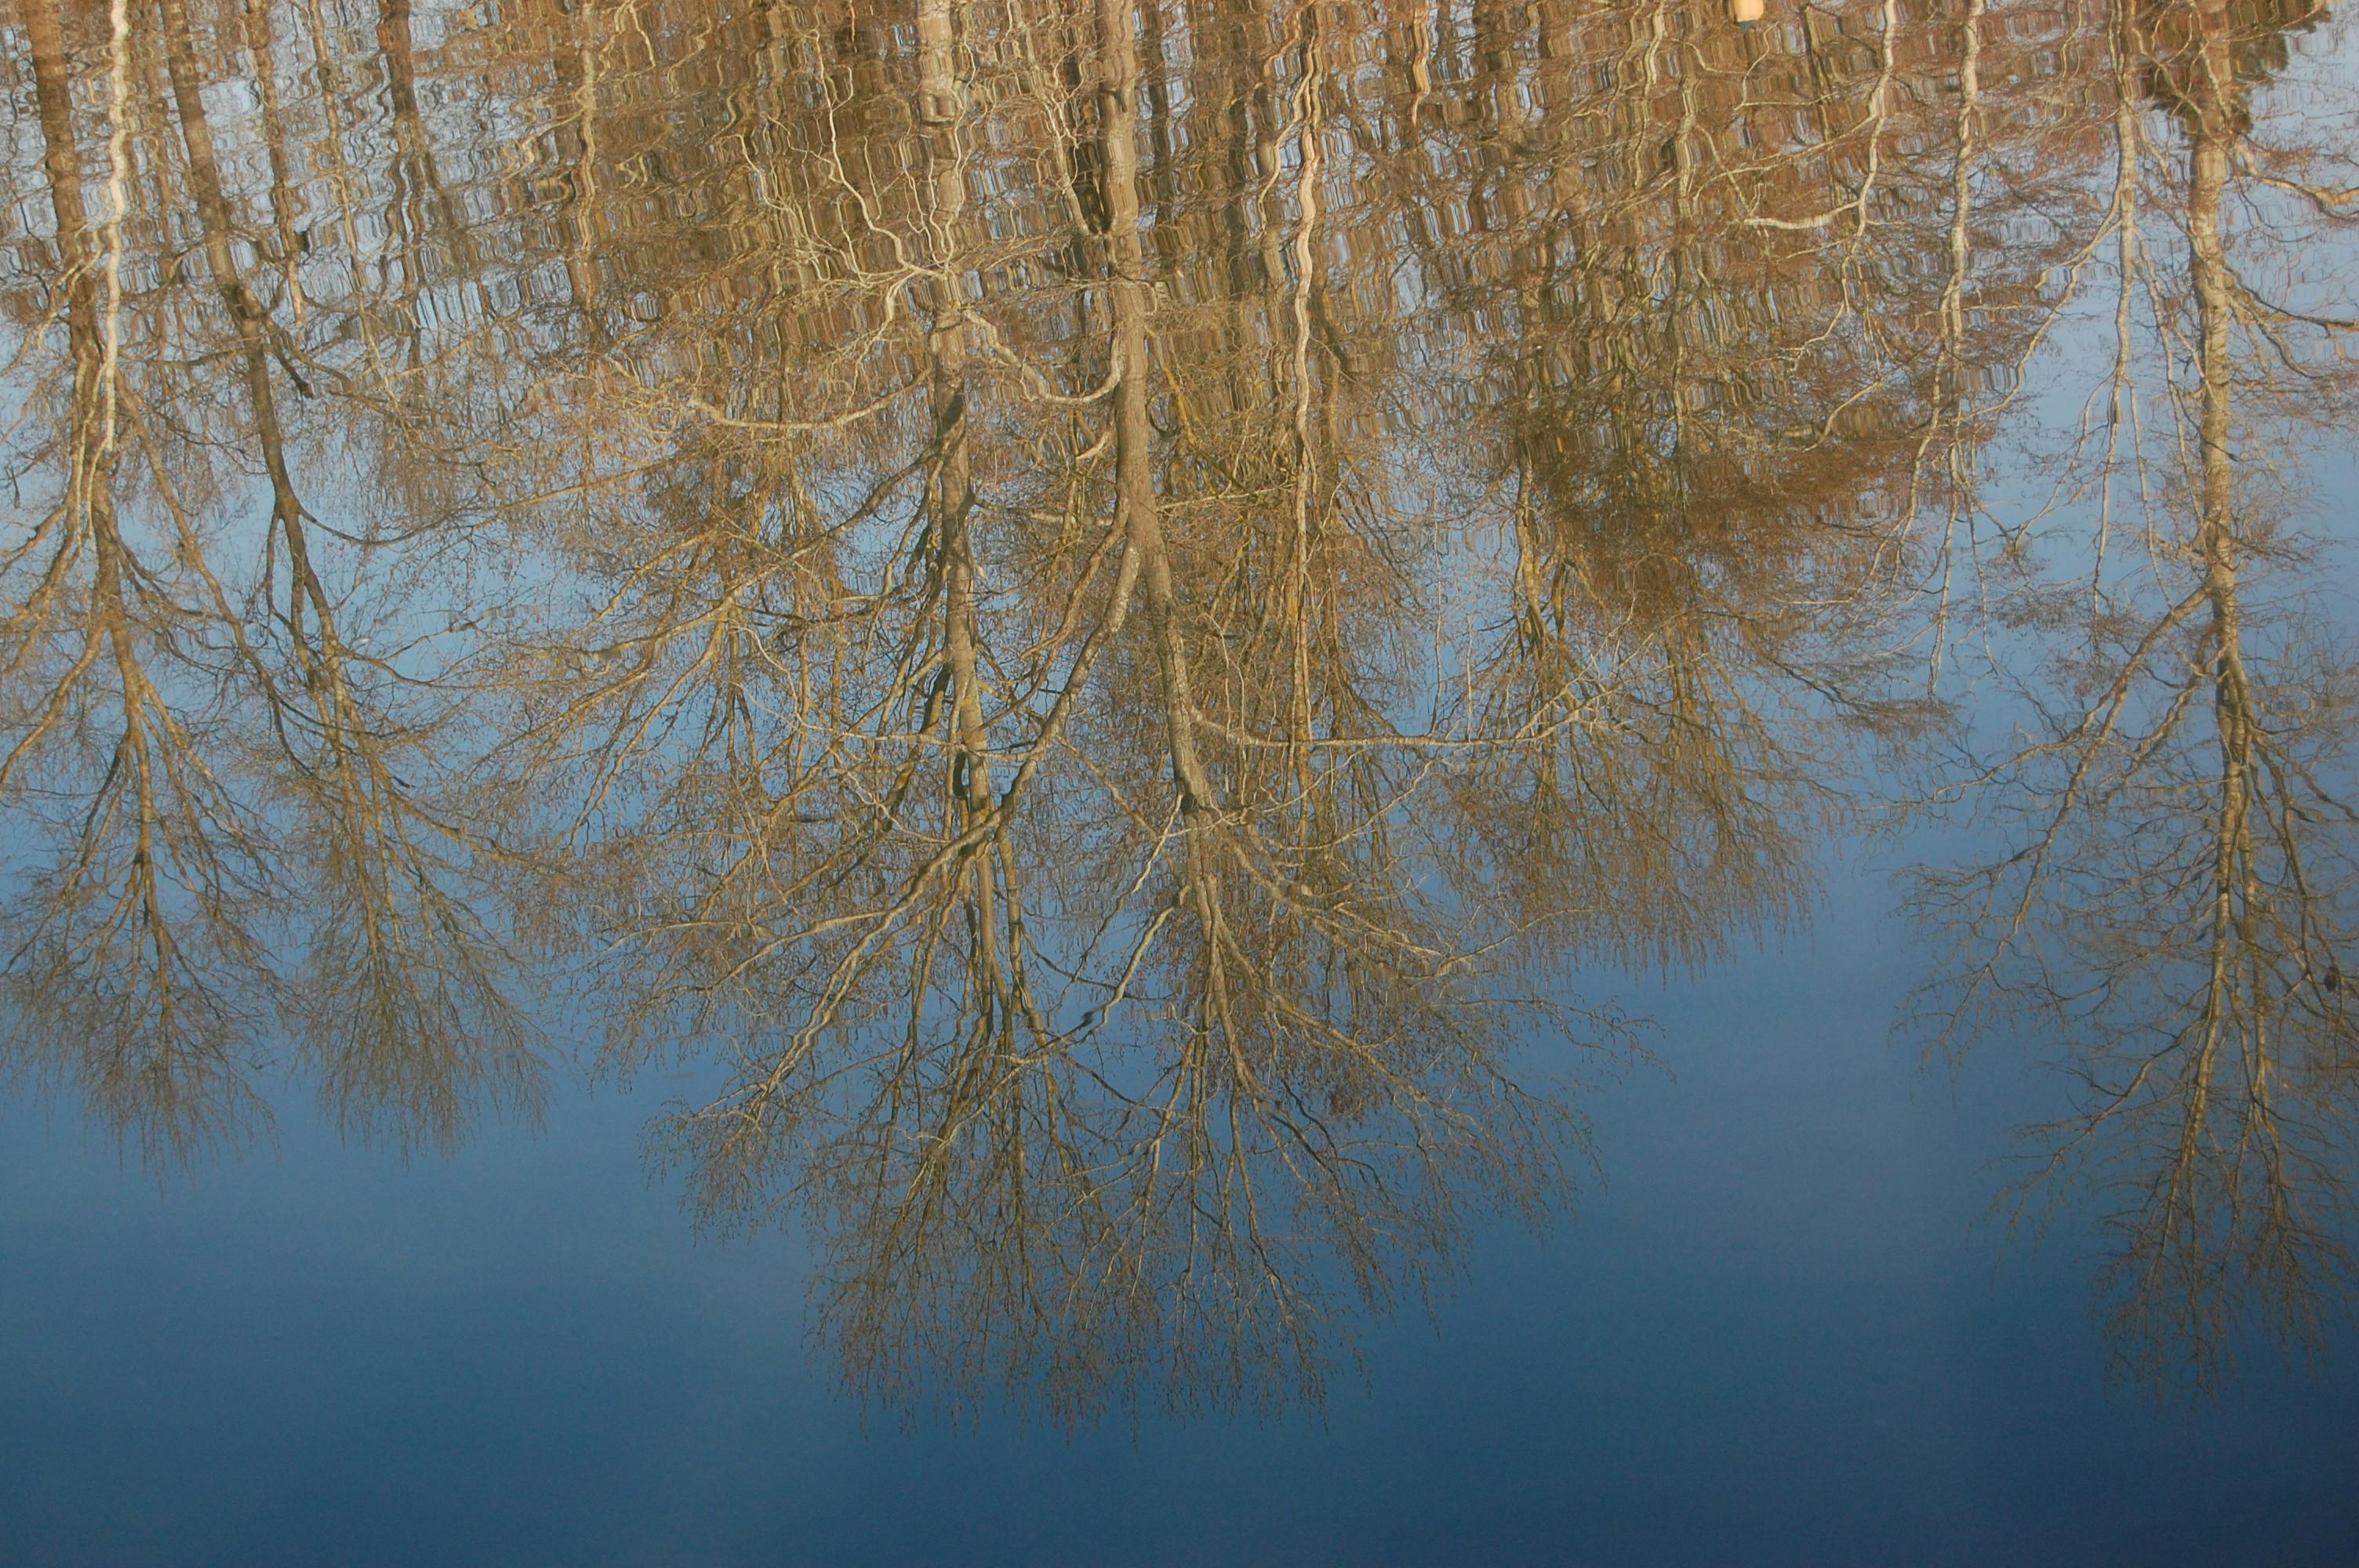 Reflect the Trees